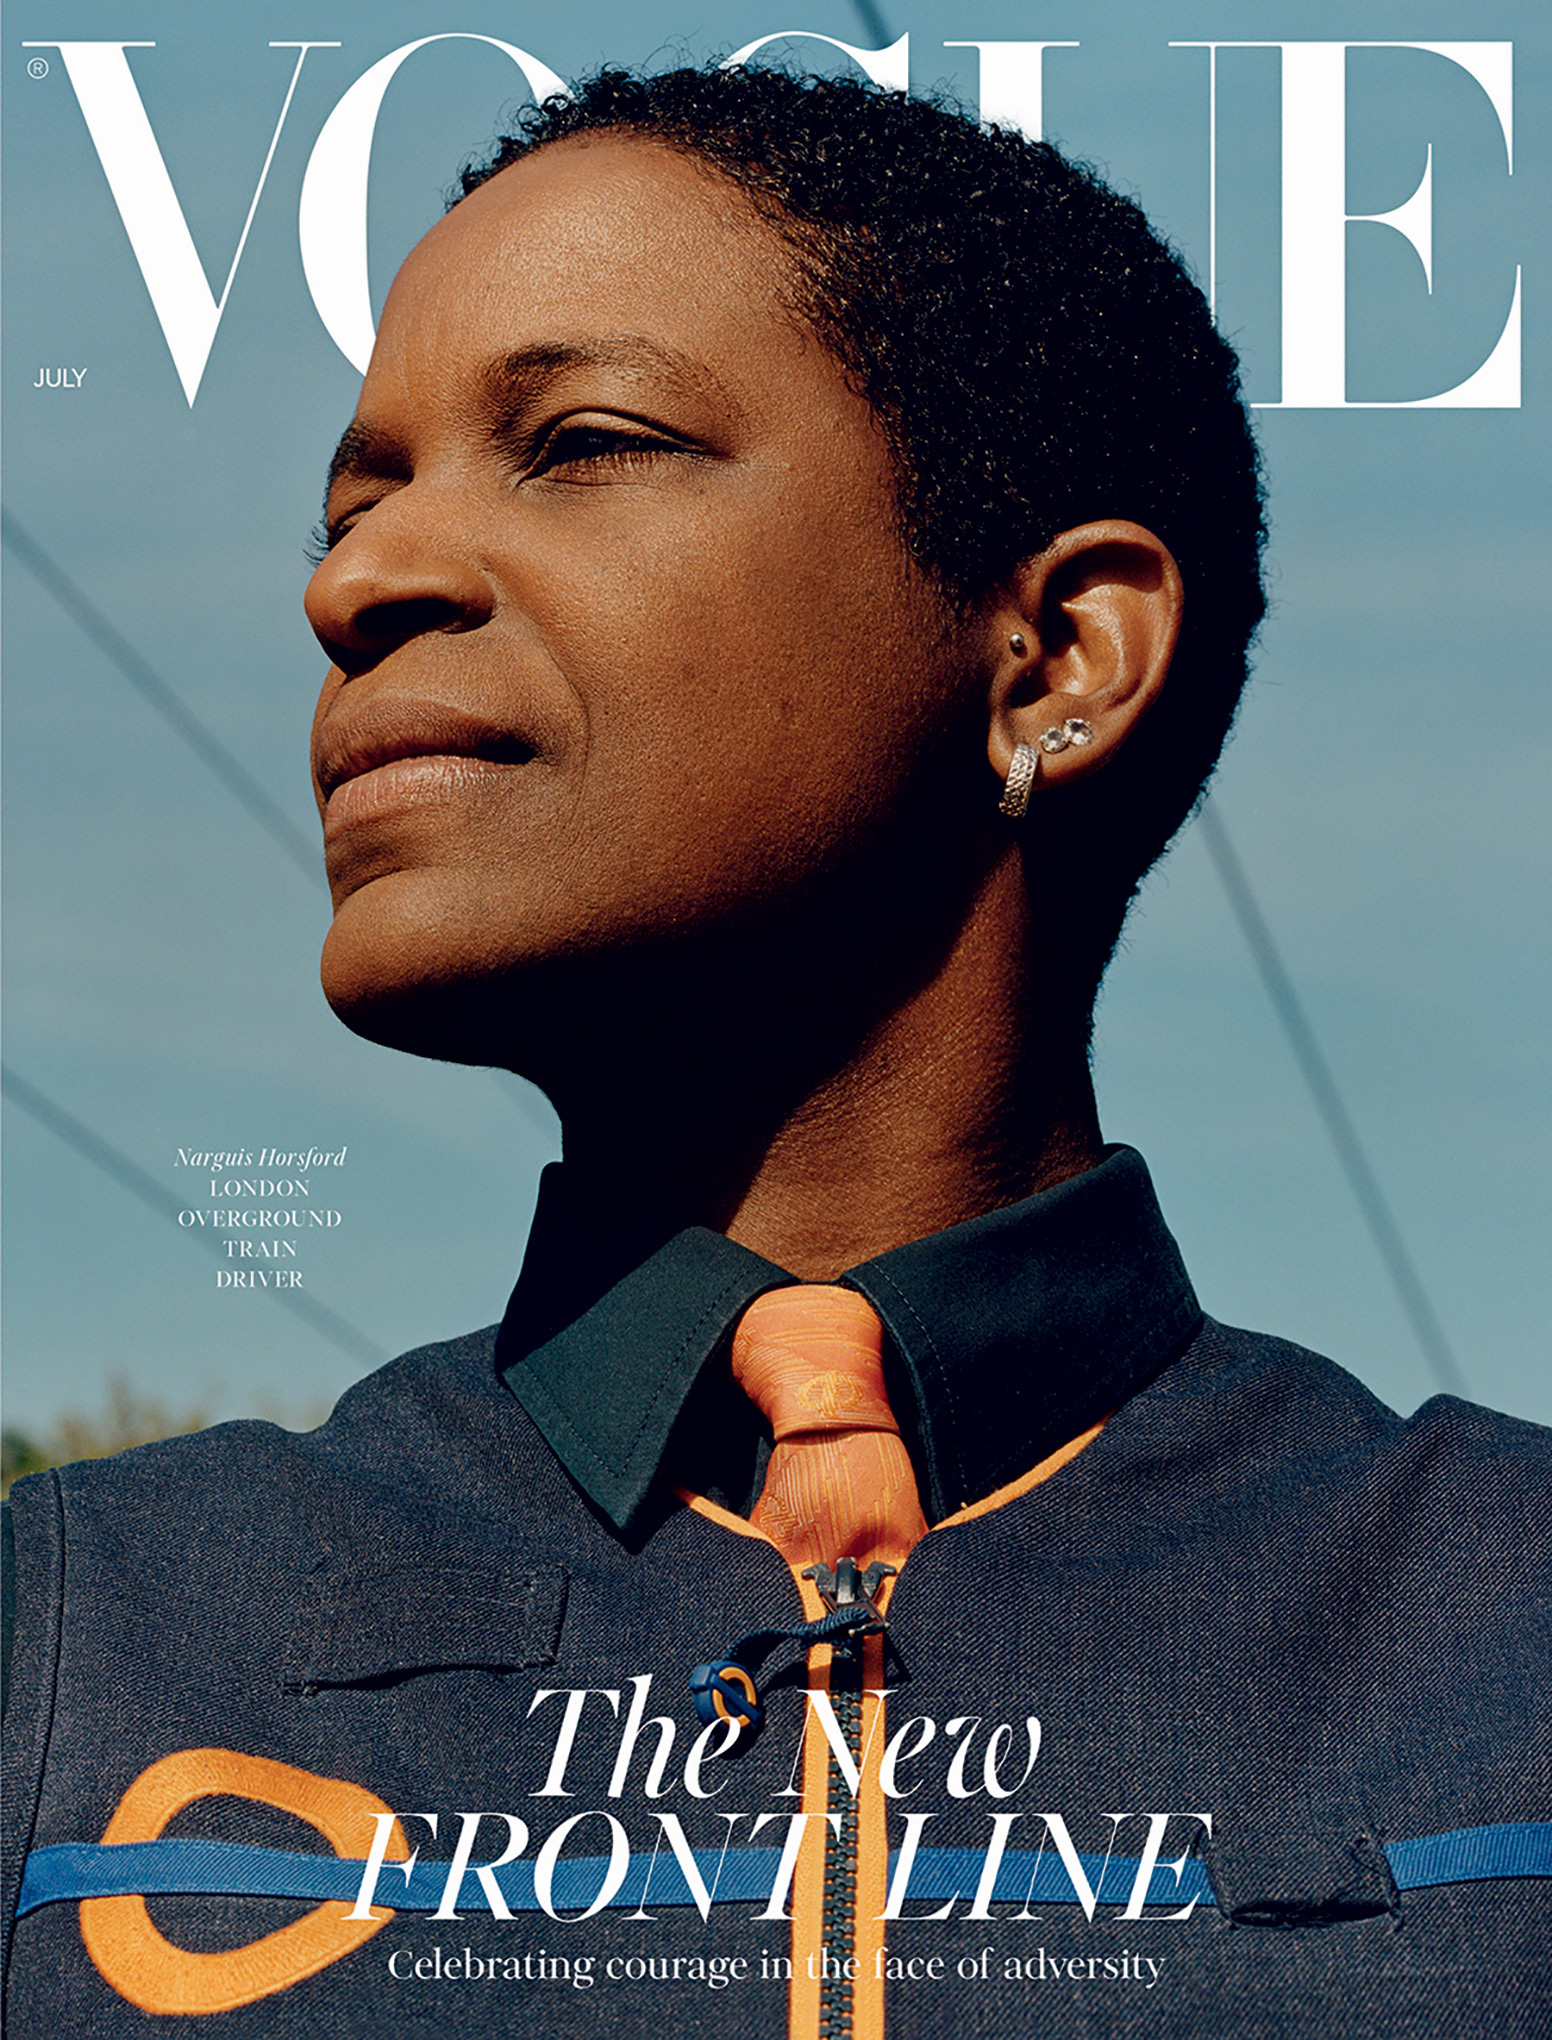 Train driver Narguis Horsford, on British Vogue’s July 2020 issue. (Courtesy Jamie Hawkesworth and Condé Nast Britain)